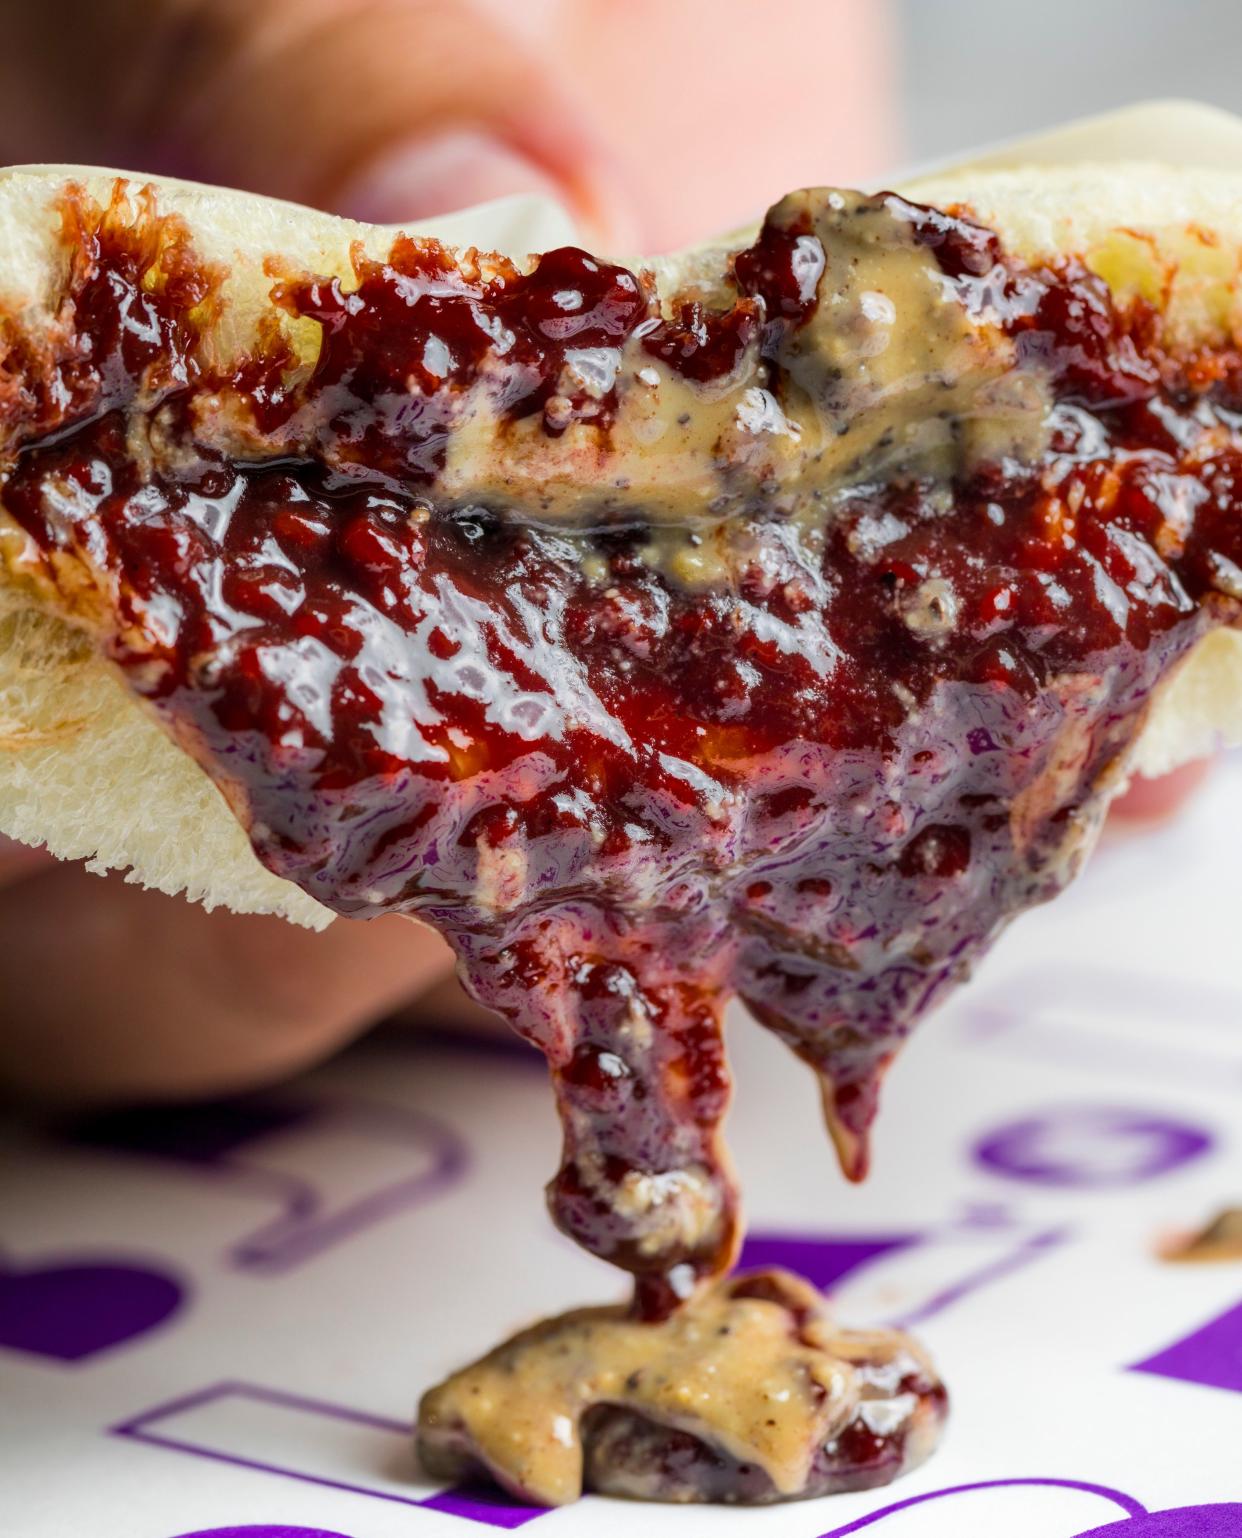 The "Red Eye" at PBJ.LA is made with espresso peanut butter and dark chocolate raspberry jam. (Photo: Jakob Layman)